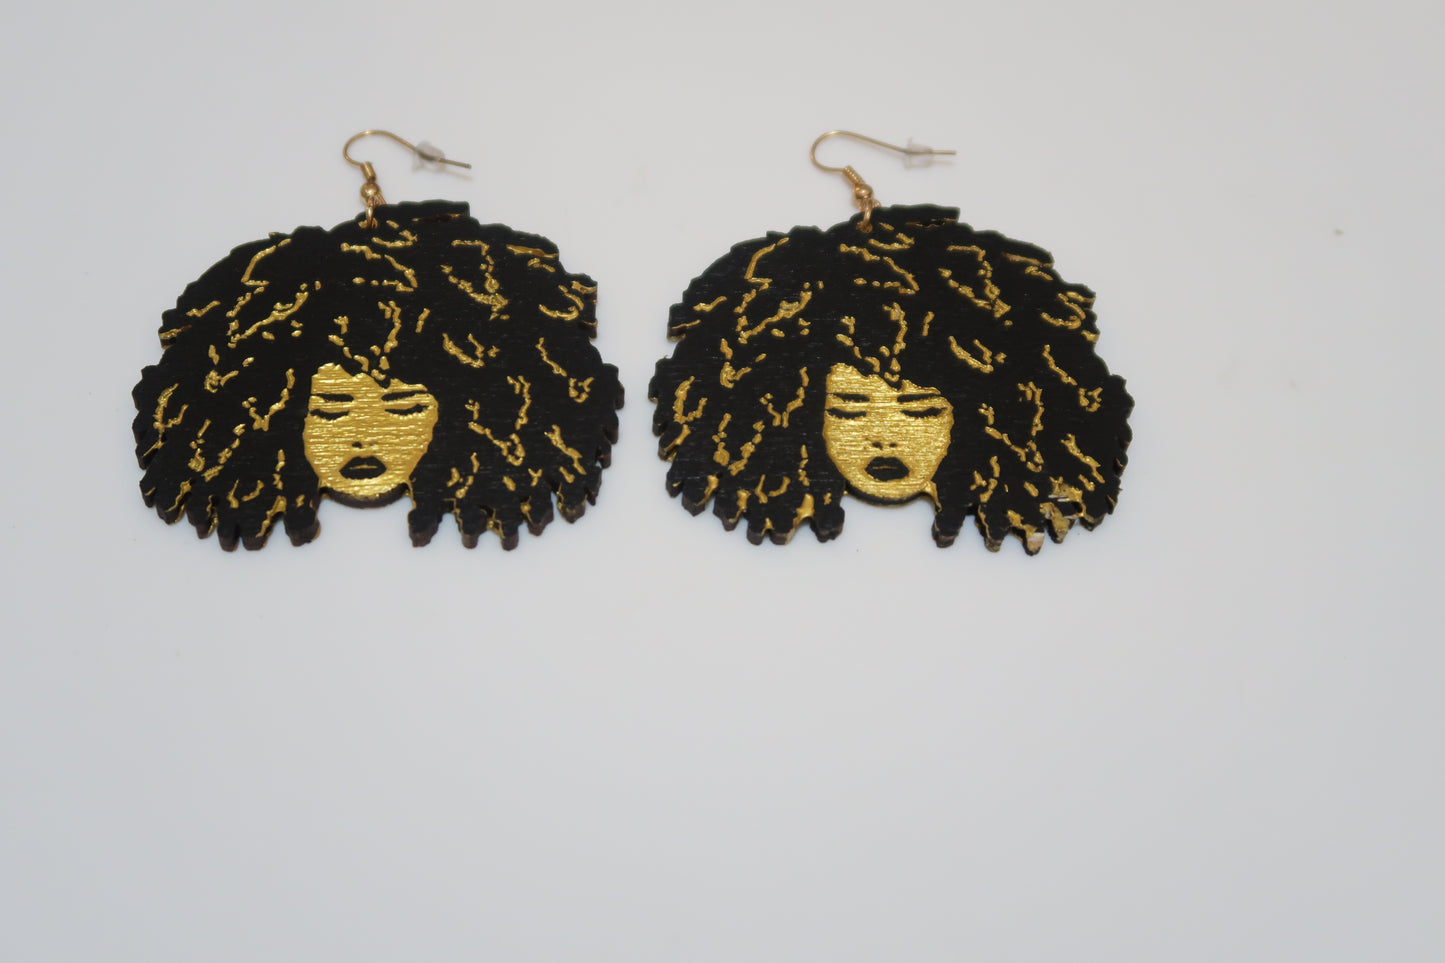 Afro hair -wooden statement earrings